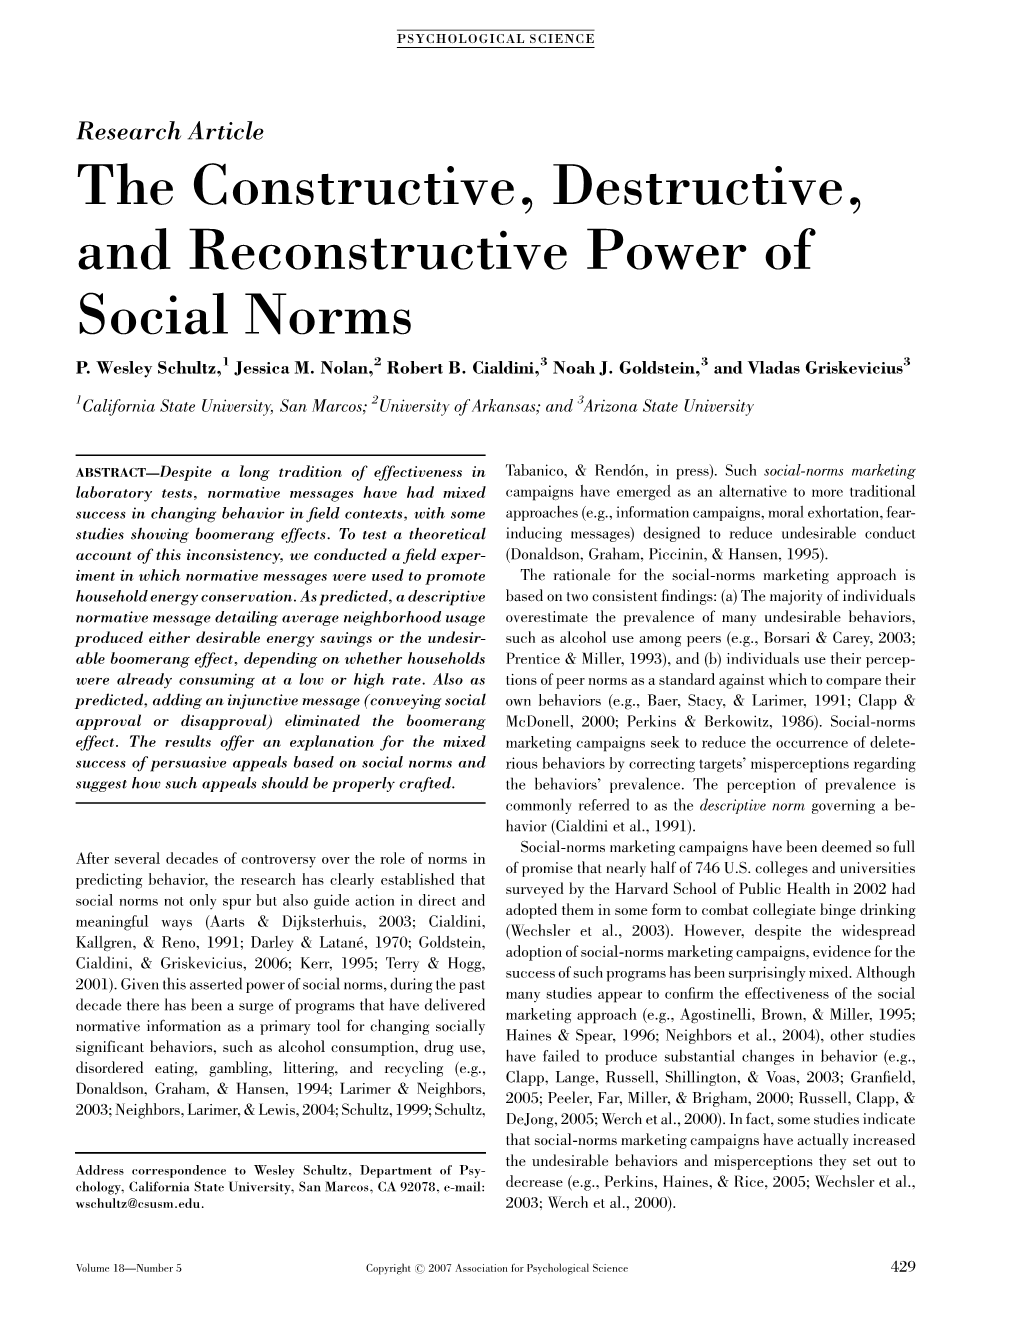 The Constructive, Destructive, and Reconstructive Power of Social Norms P